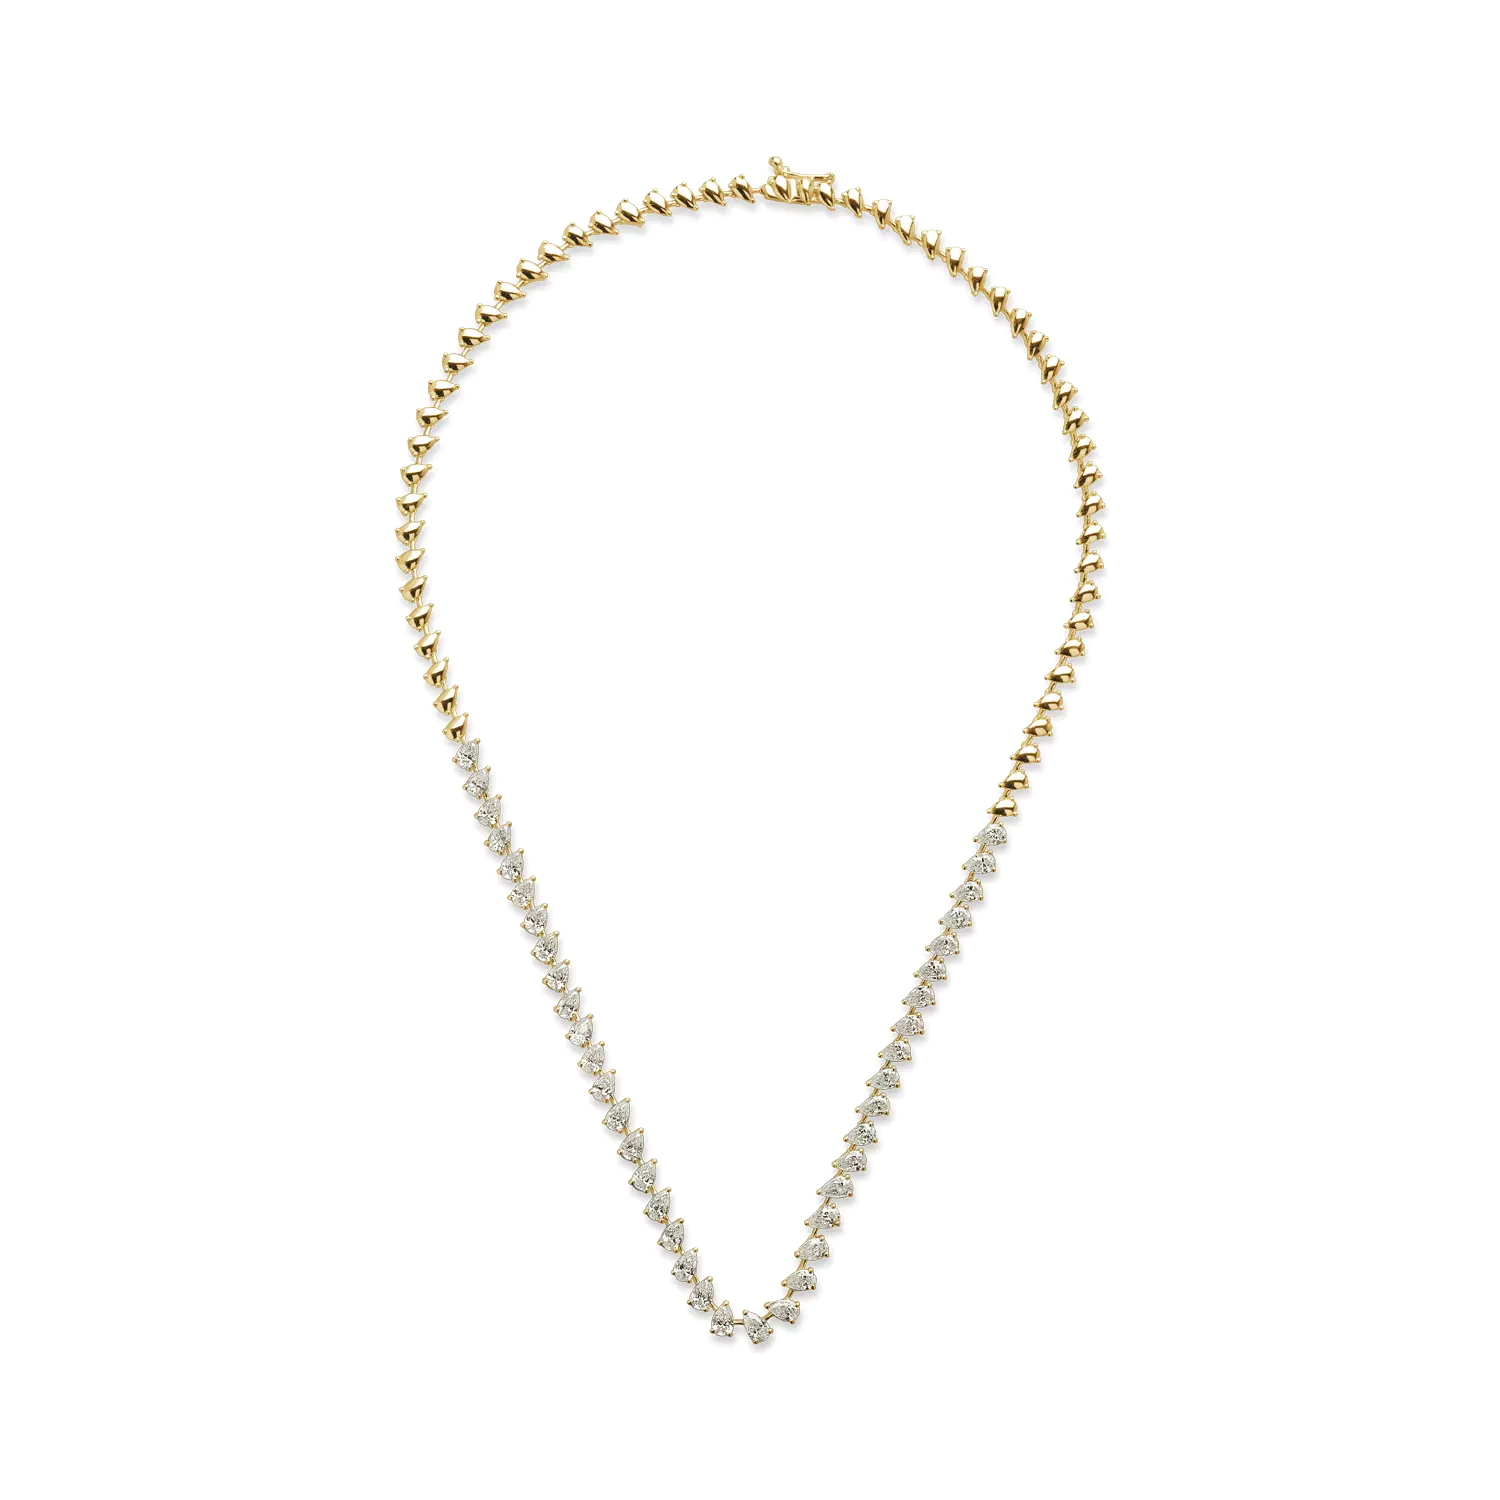 Yellow gold tennis necklace with 6.58ct diamonds